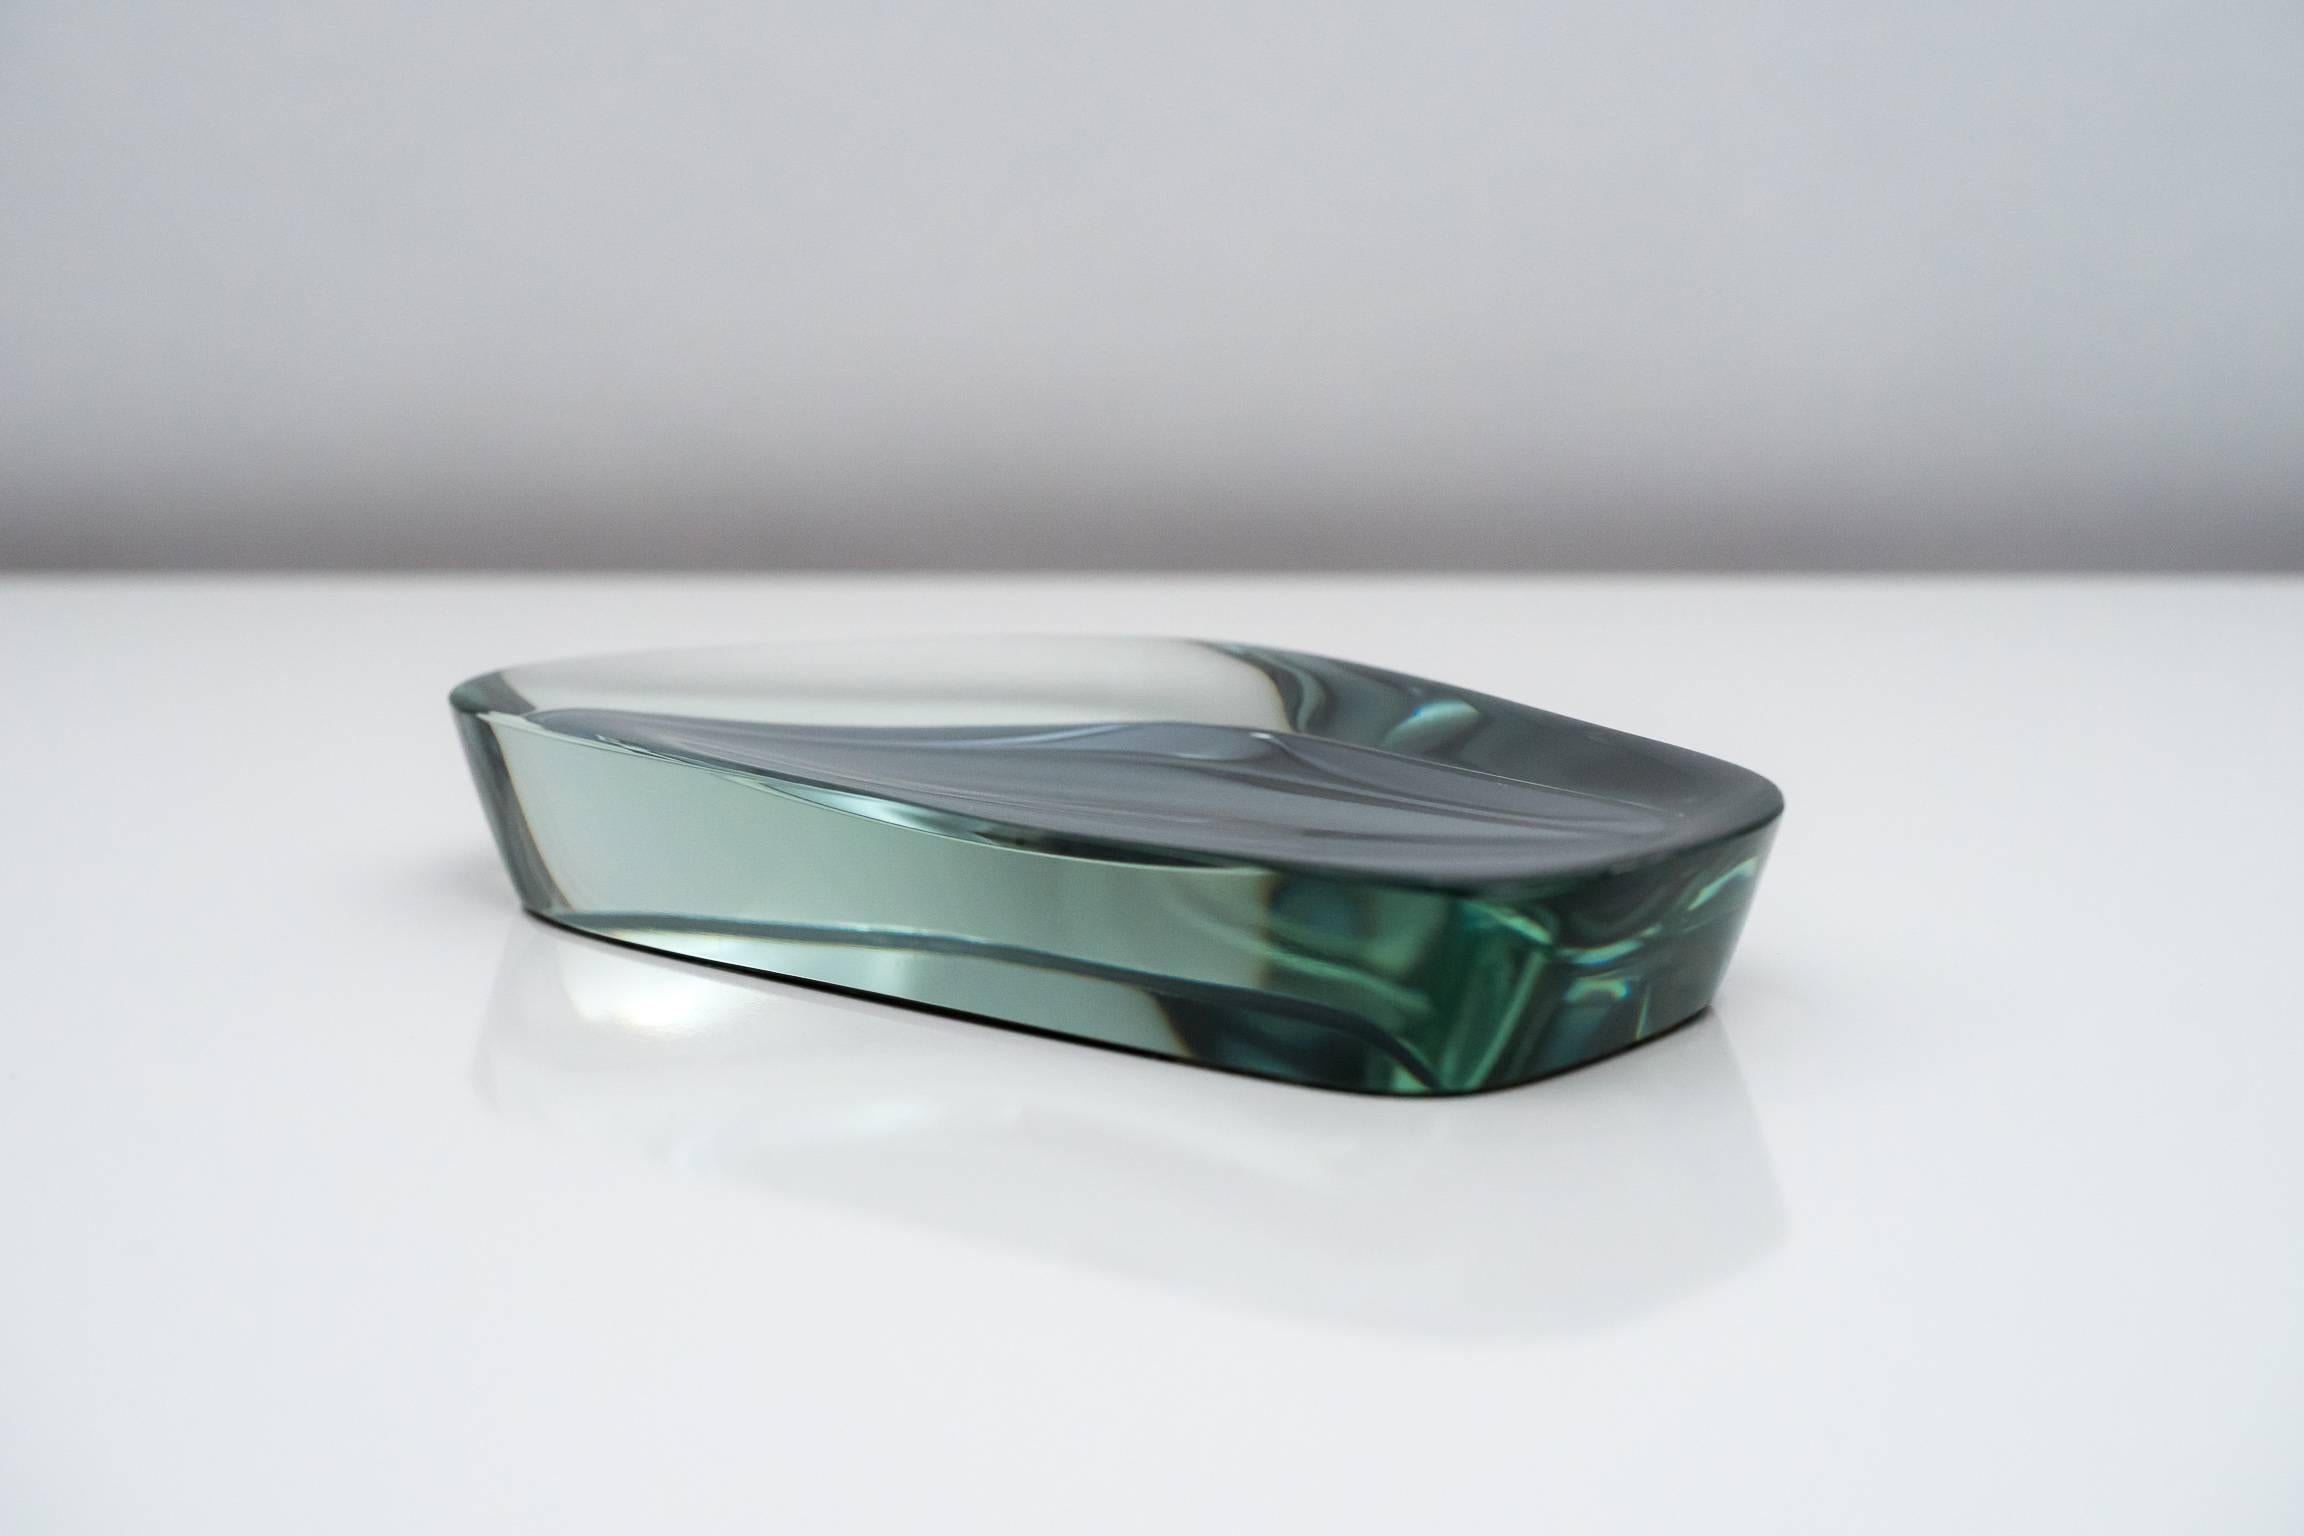 Fontana Arte Cut and Polished Mirrored Glass Abstract Dish, 1950s (Italienisch)